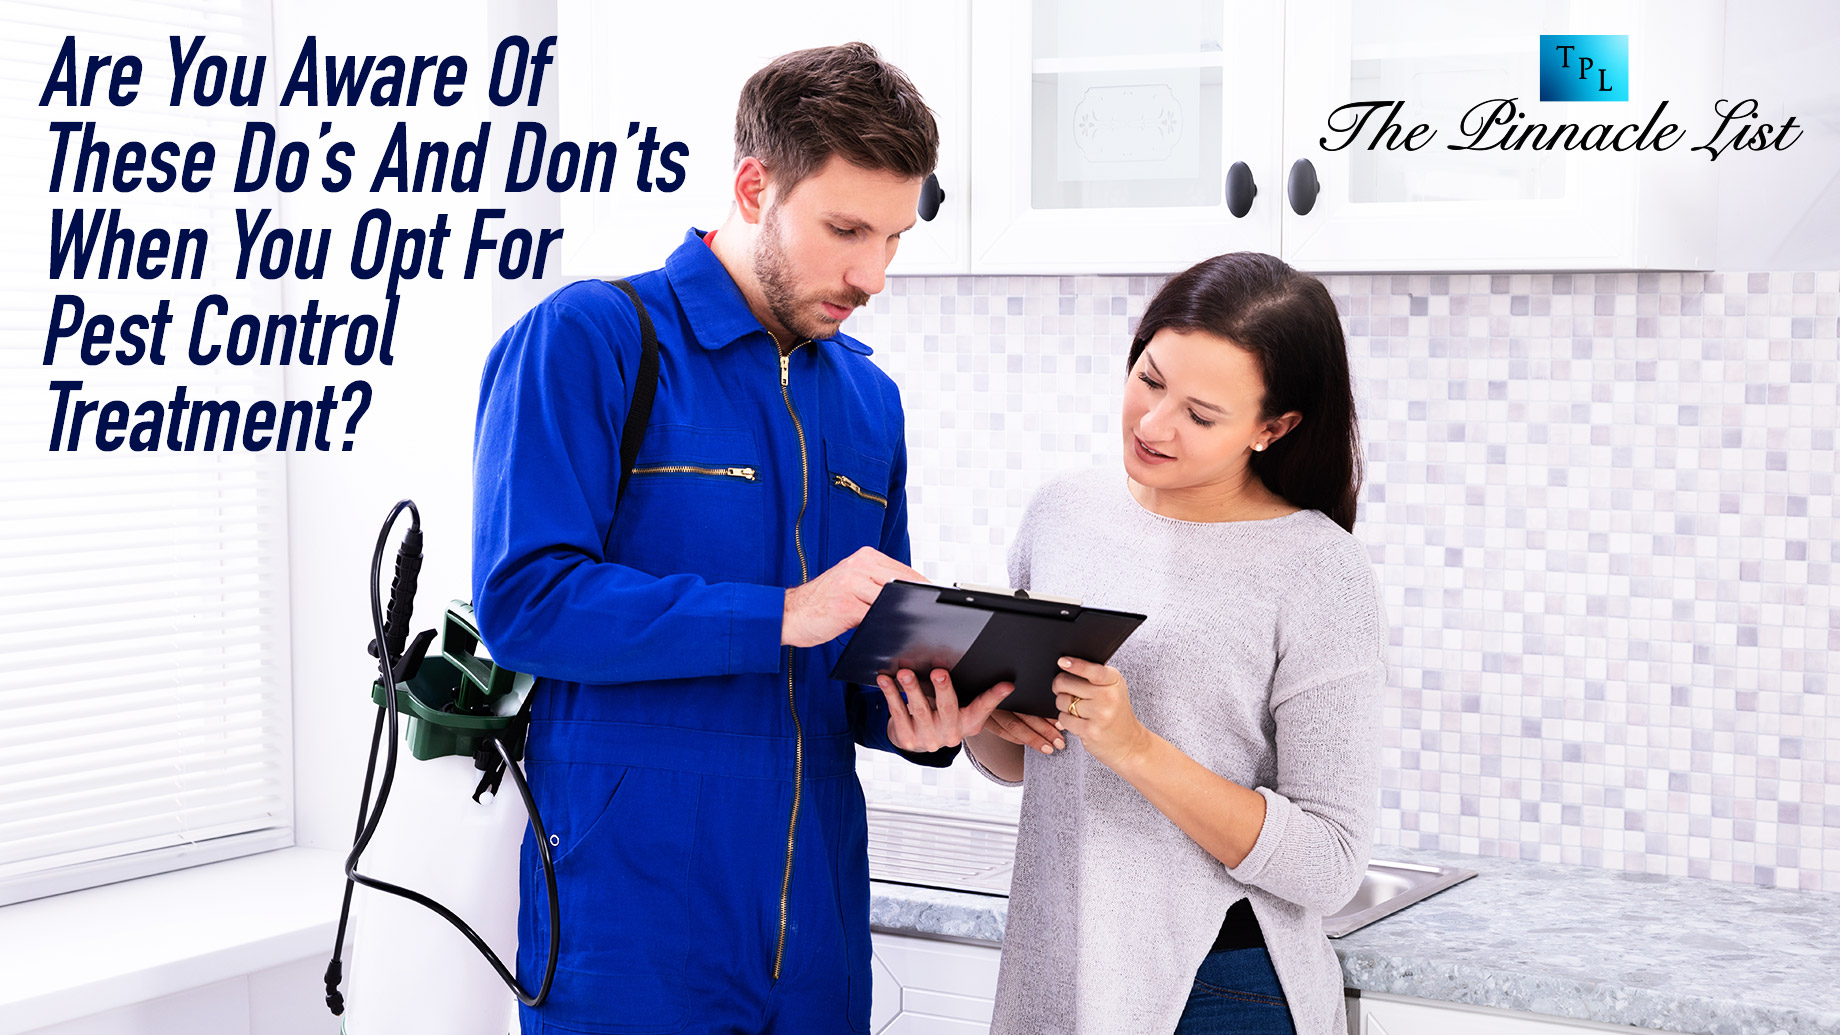 Are You Aware Of These Do’s And Don’ts When You Opt For Pest Control Treatment?